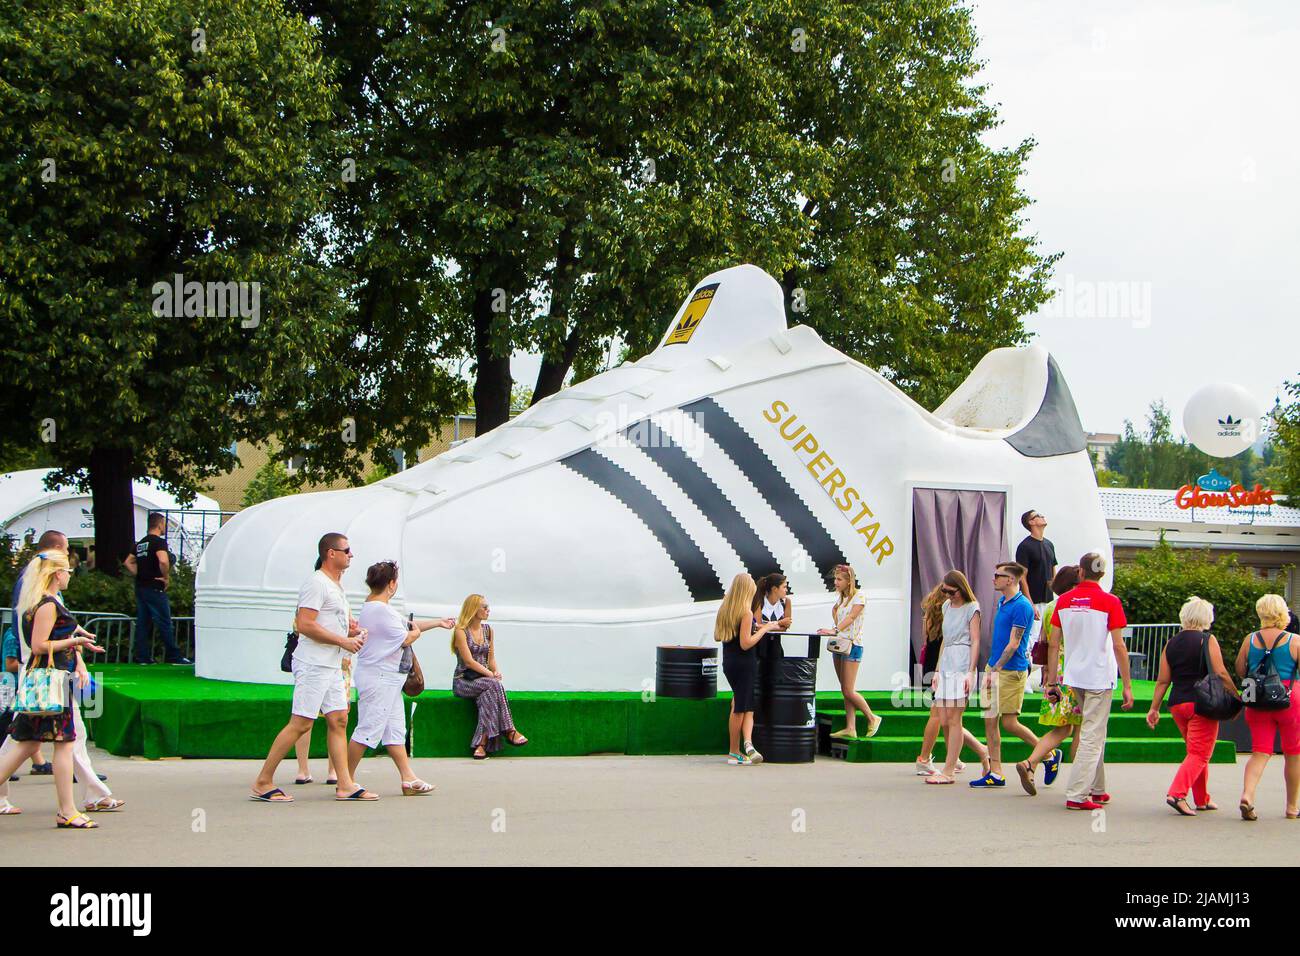 Gorky Park in Moscow. Summer day in public famous place in center of Russian capital - August 11, 2015. Stock Photo